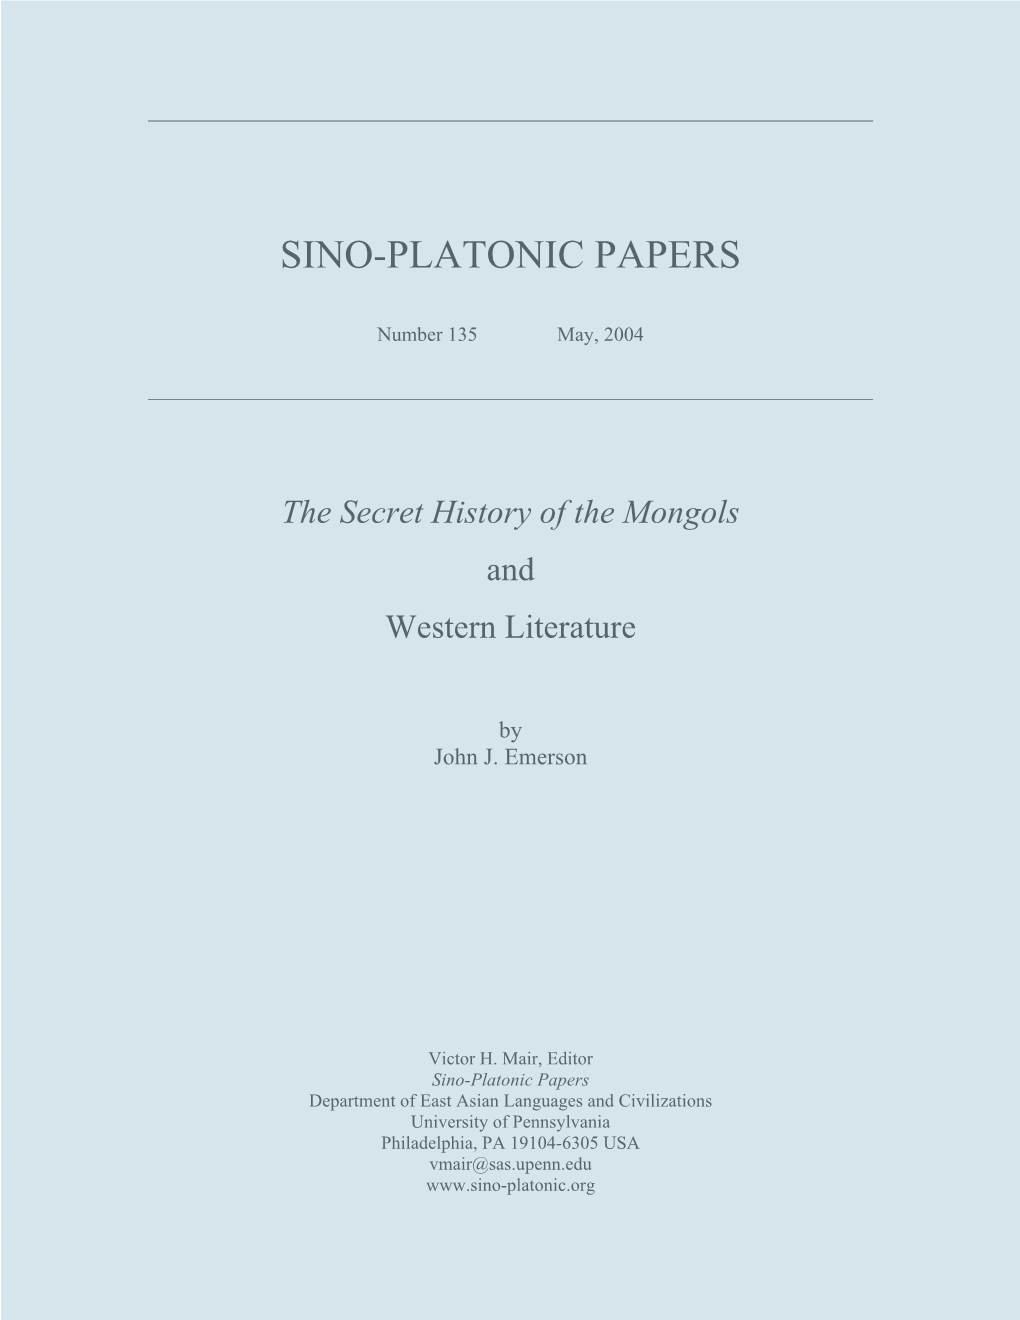 The Secret History of the Mongols and Western Literature